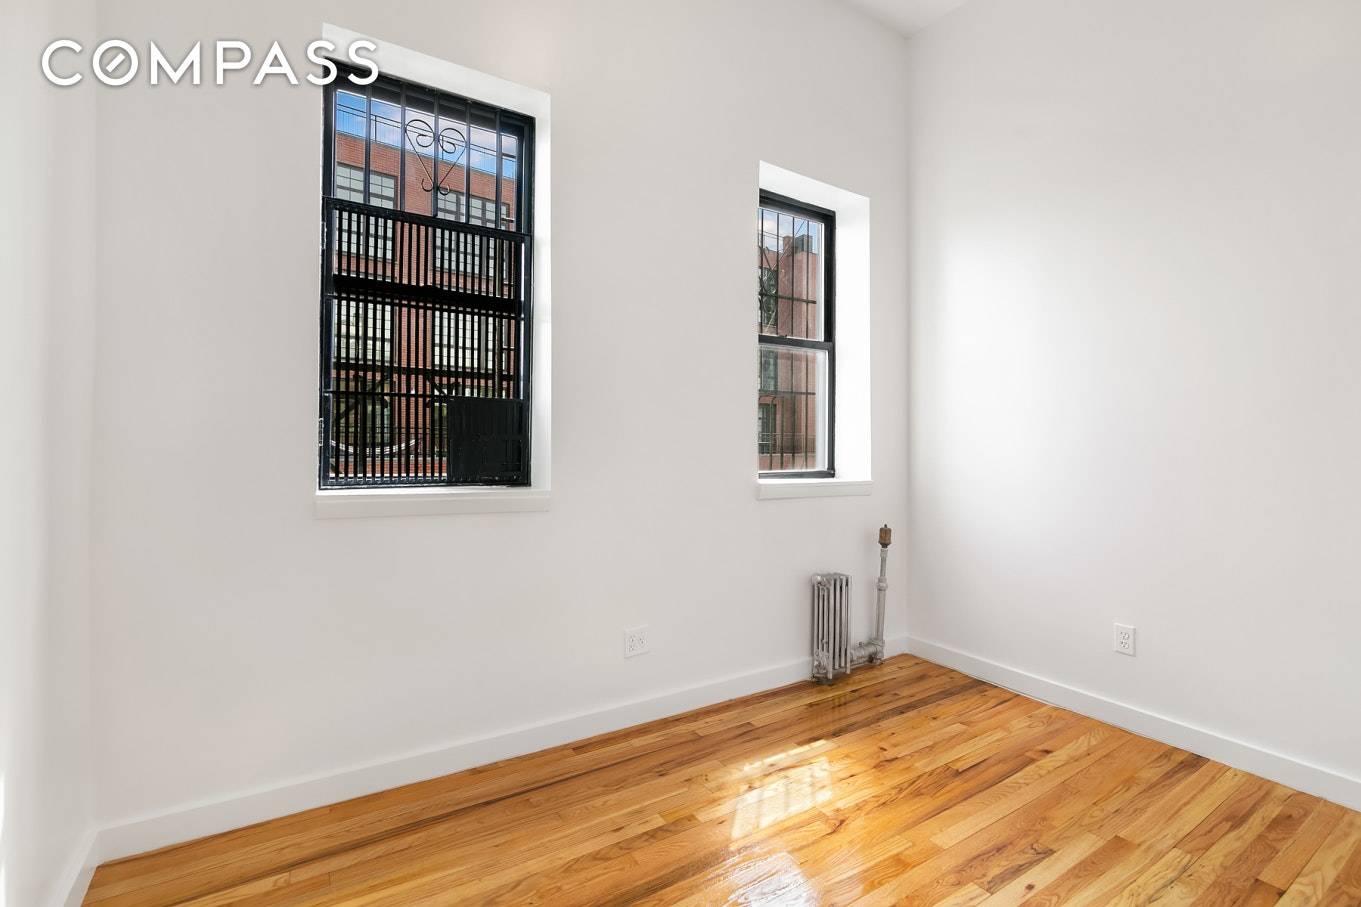 You'll find this spacious and sunny convertible 2 bedroom where NoliTa meets Soho.